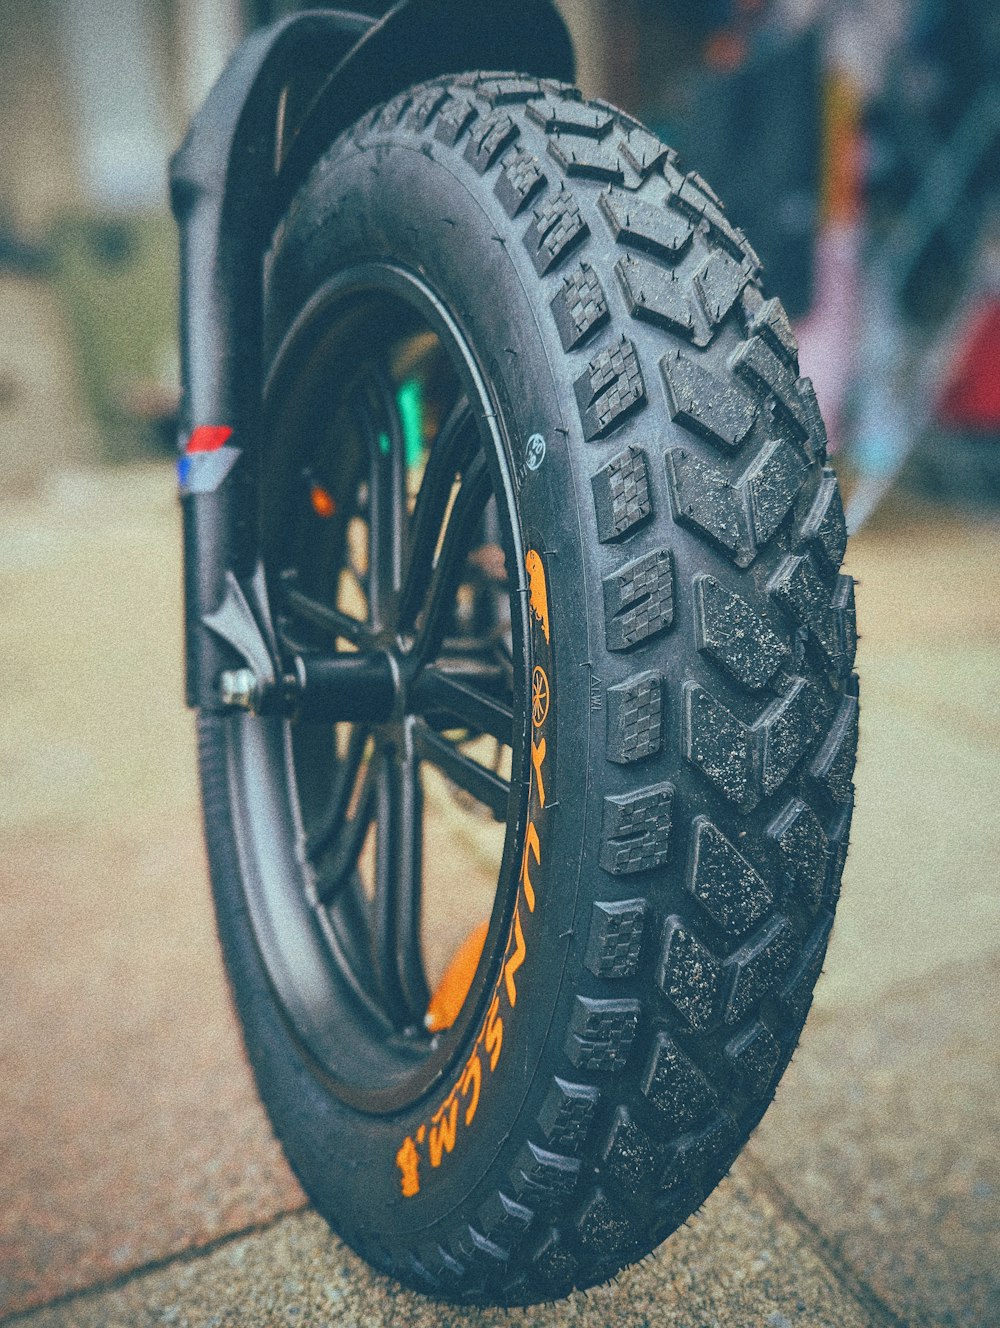 a close up of a tire on a motorcycle